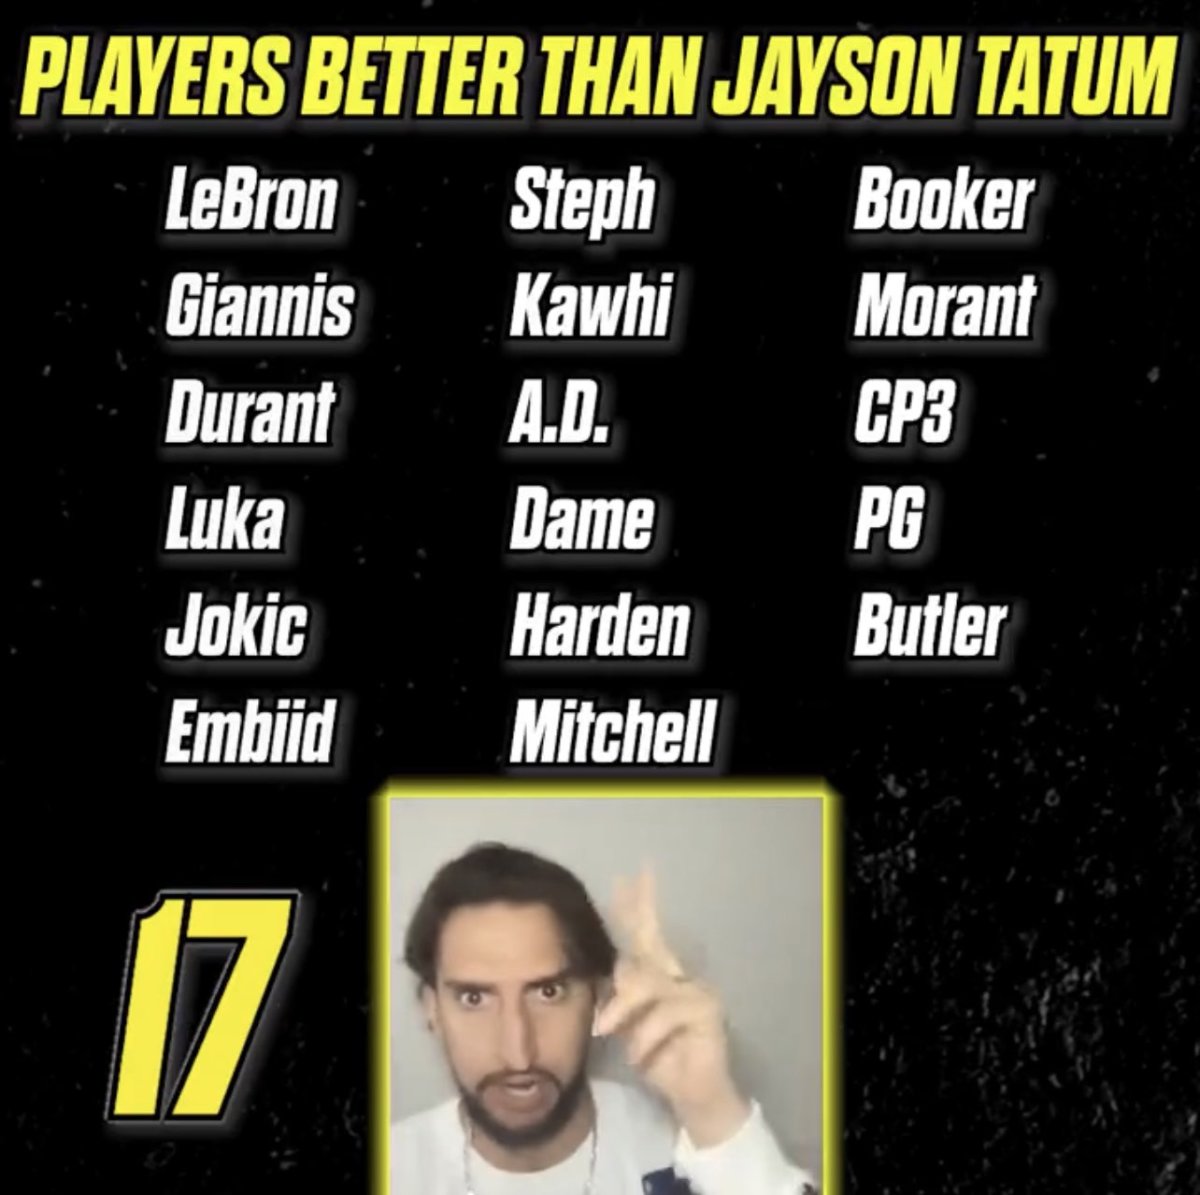 Nick Wright Made A Controversial List Of 17 NBA Players Who Are Better Than Jayson Tatum